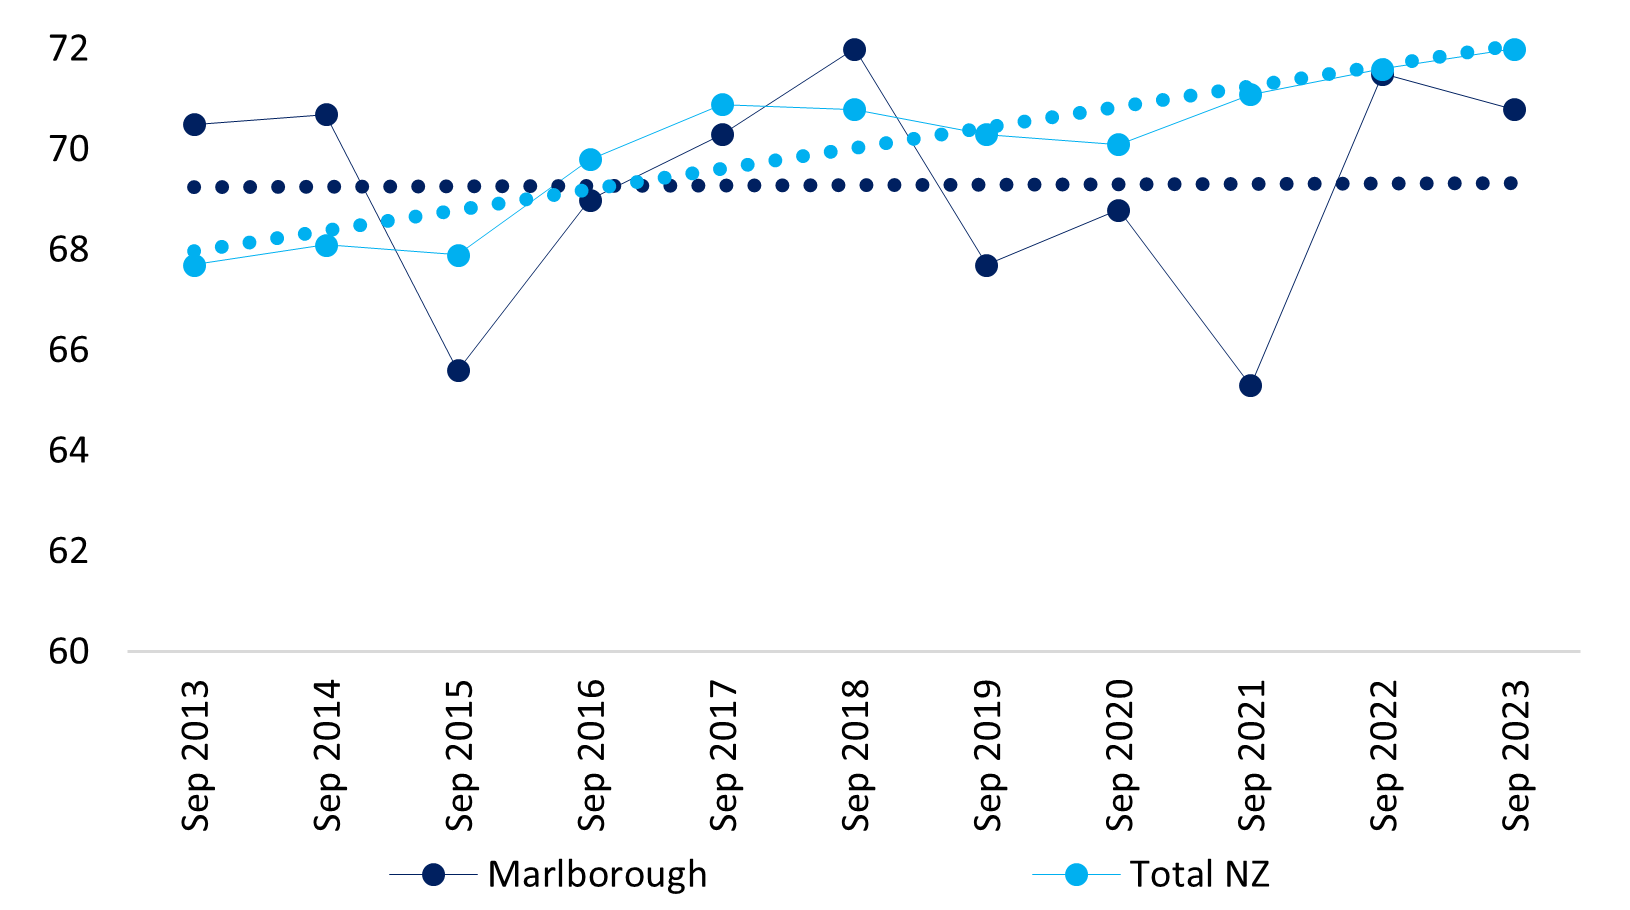 Marlborough and total NZ labour force participation rate (%) - September quarters 2013 to 2023 (value #)